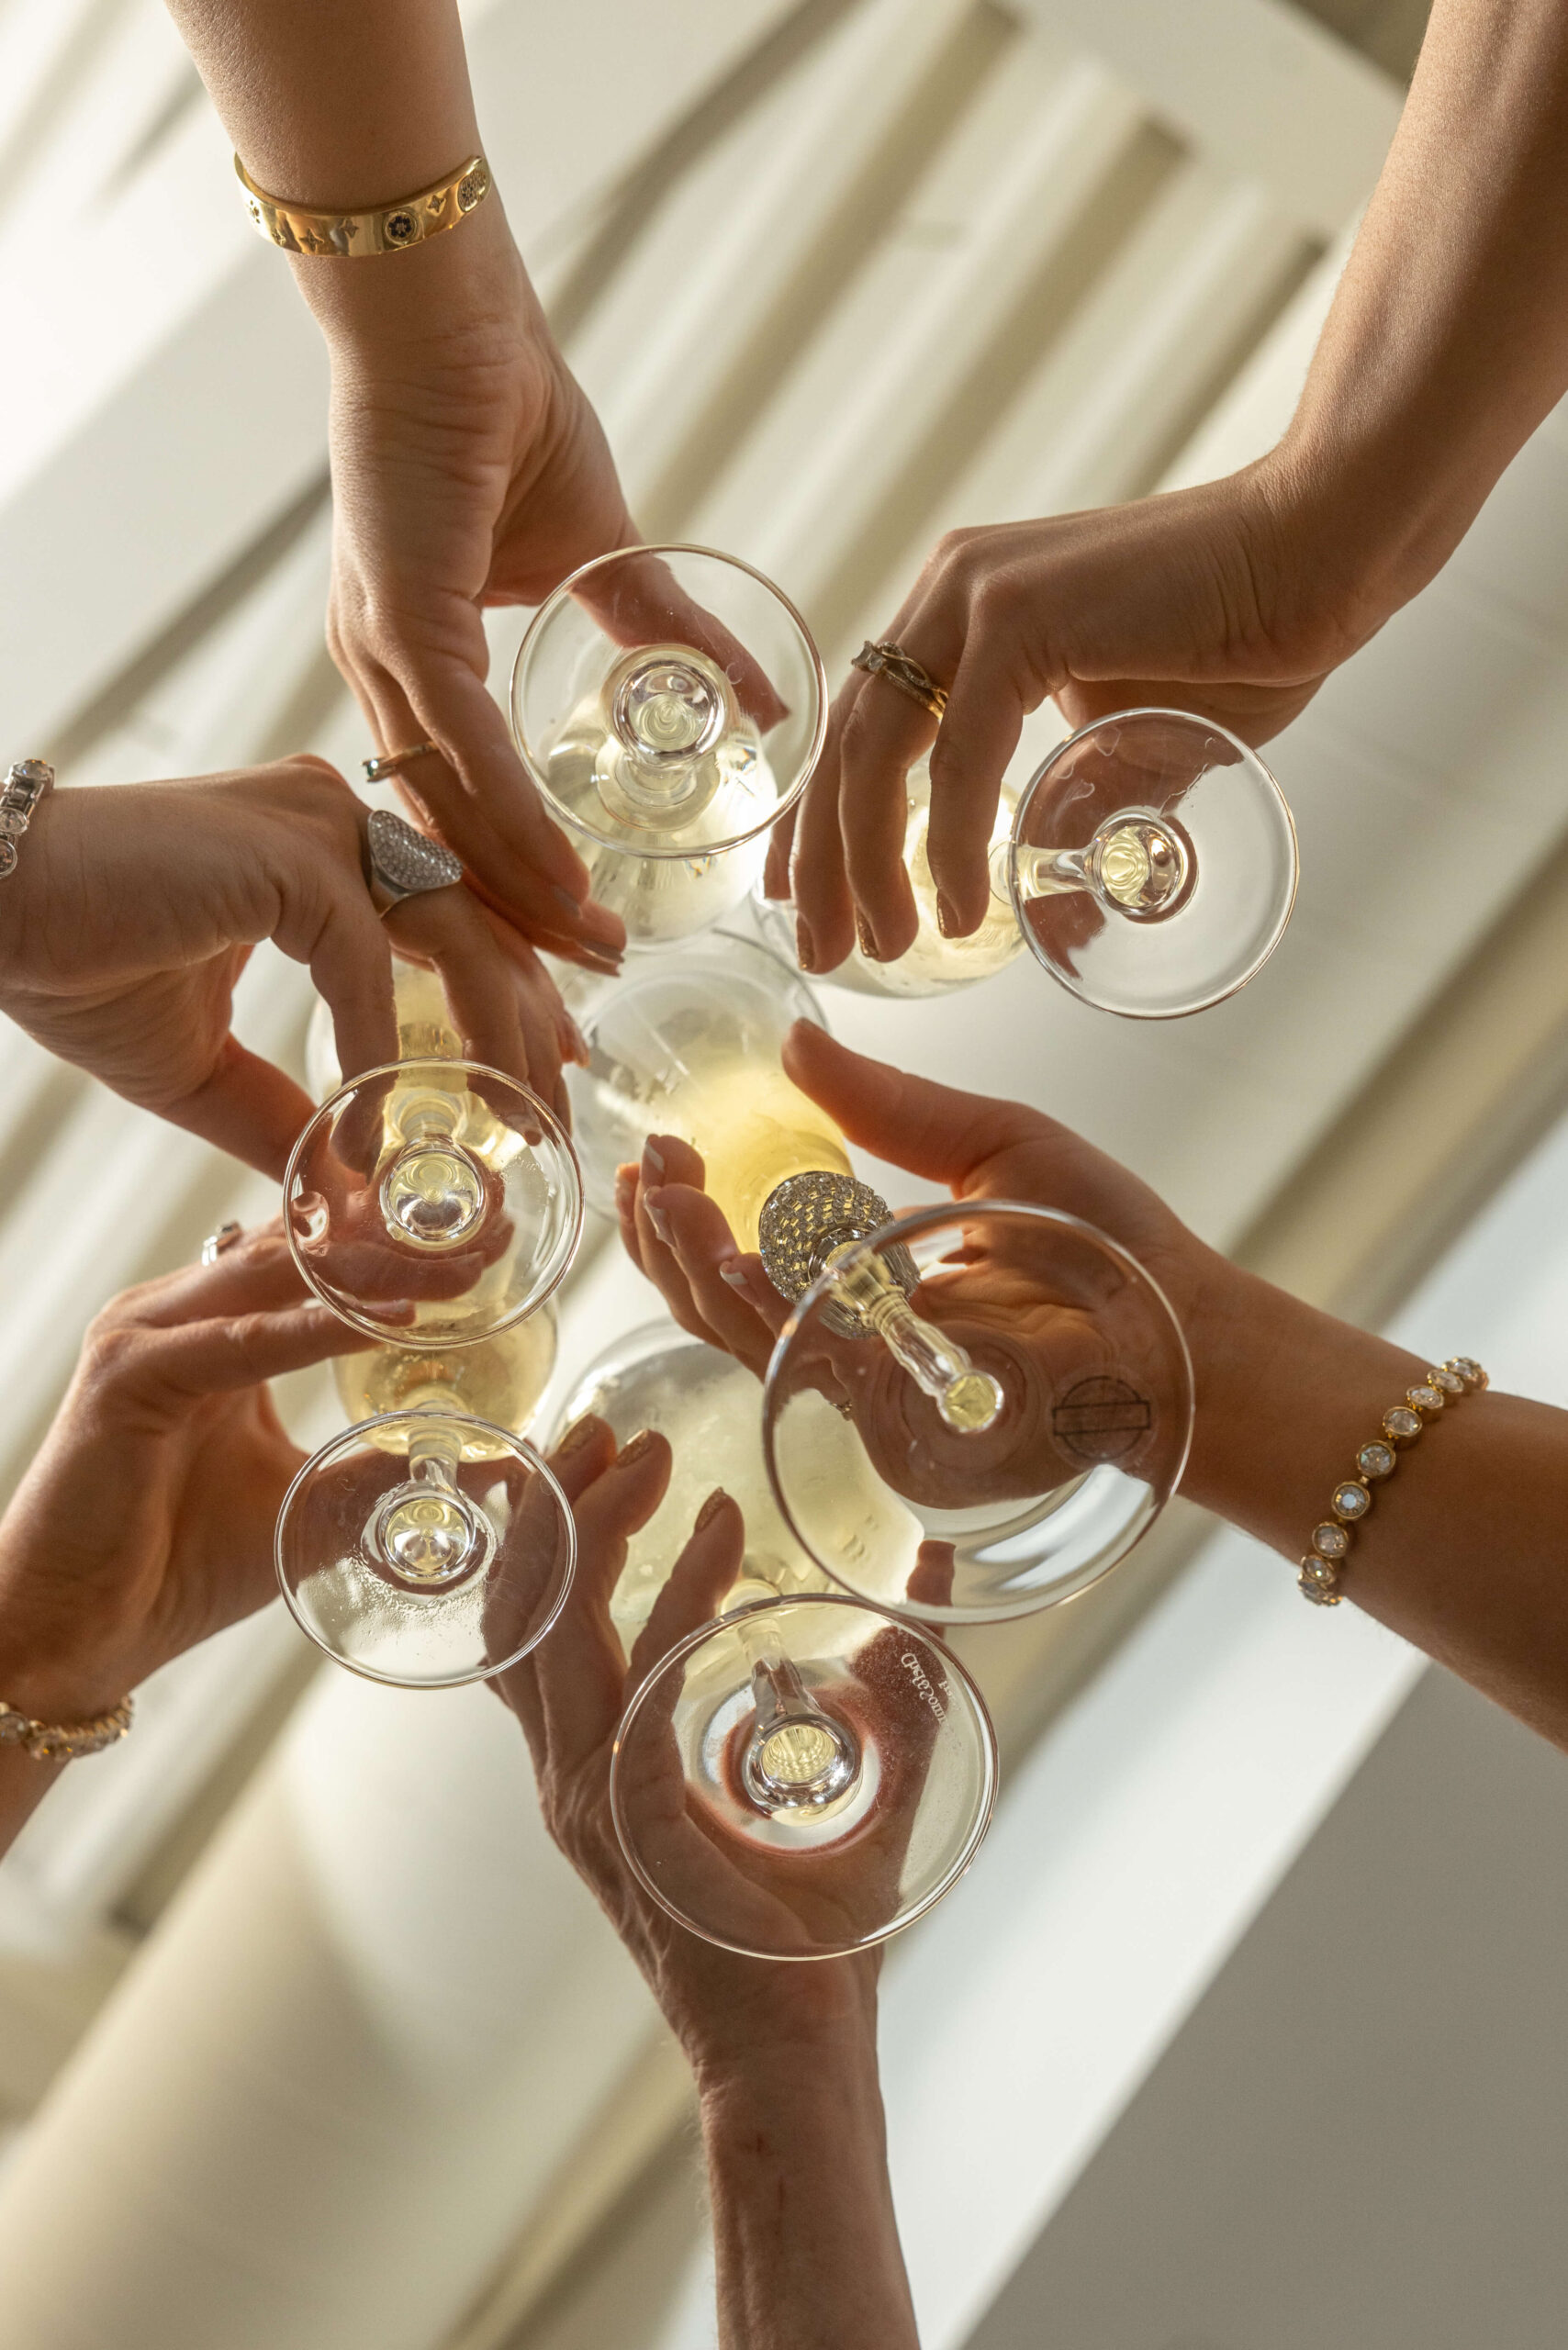 women's hands clanking and toasting champagne glasses from below